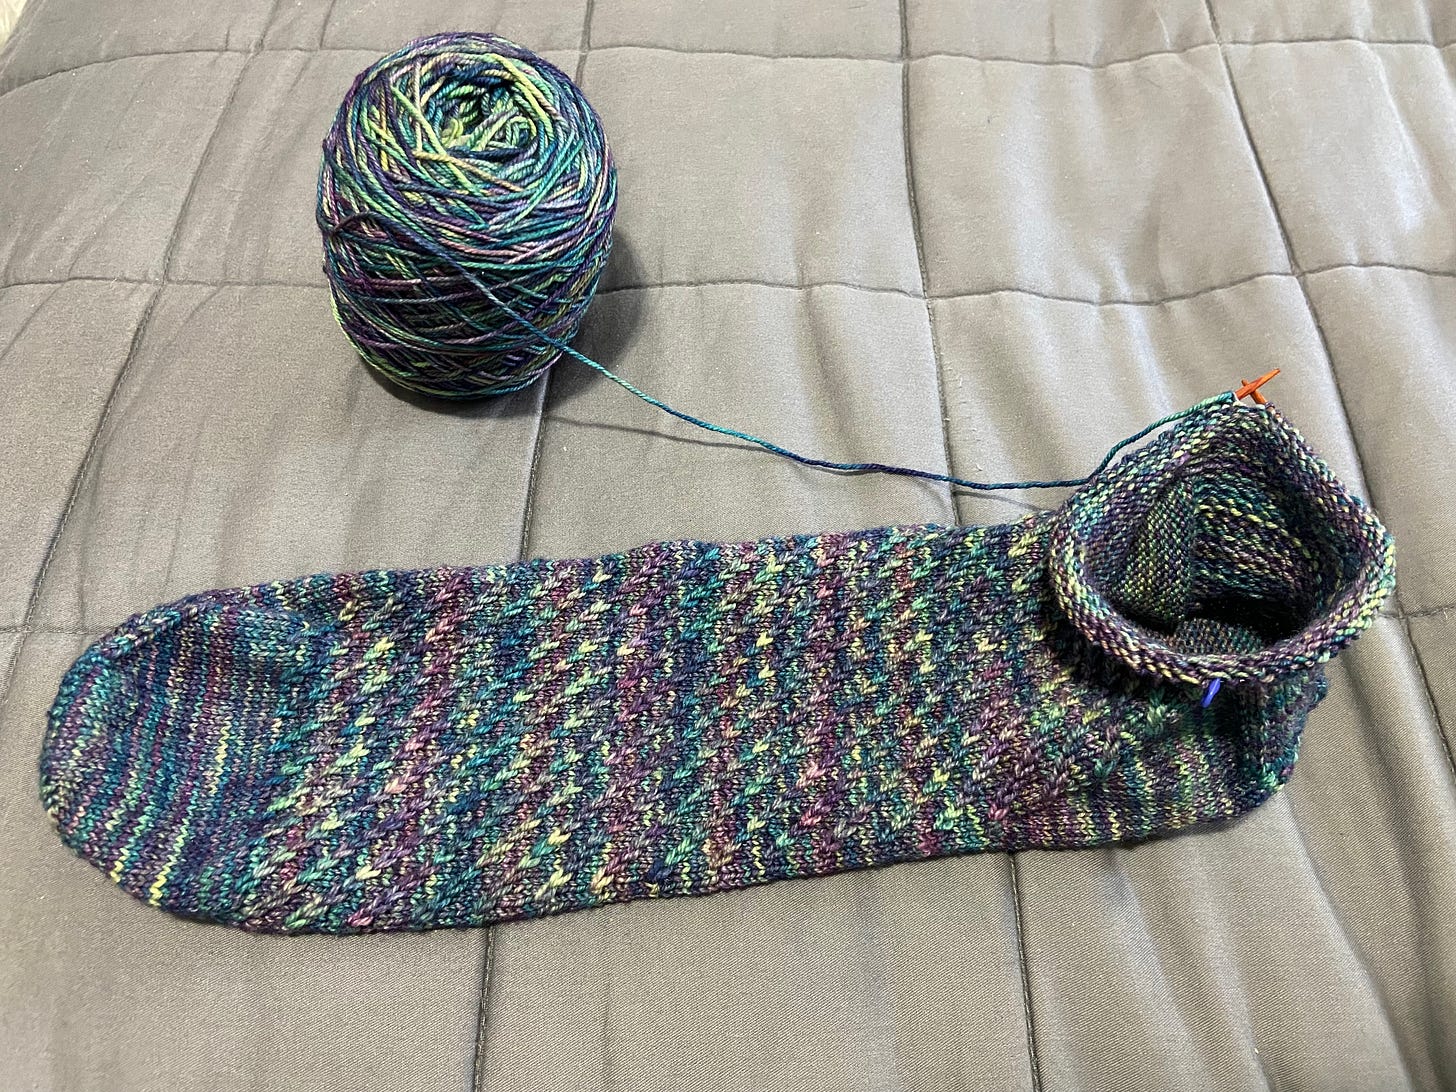 A green, blue, and purple sock (still in-progress) knitted toe-up is displayed on a bed; I just started on the leg. Tiny circular needles and a partial skein are attached.